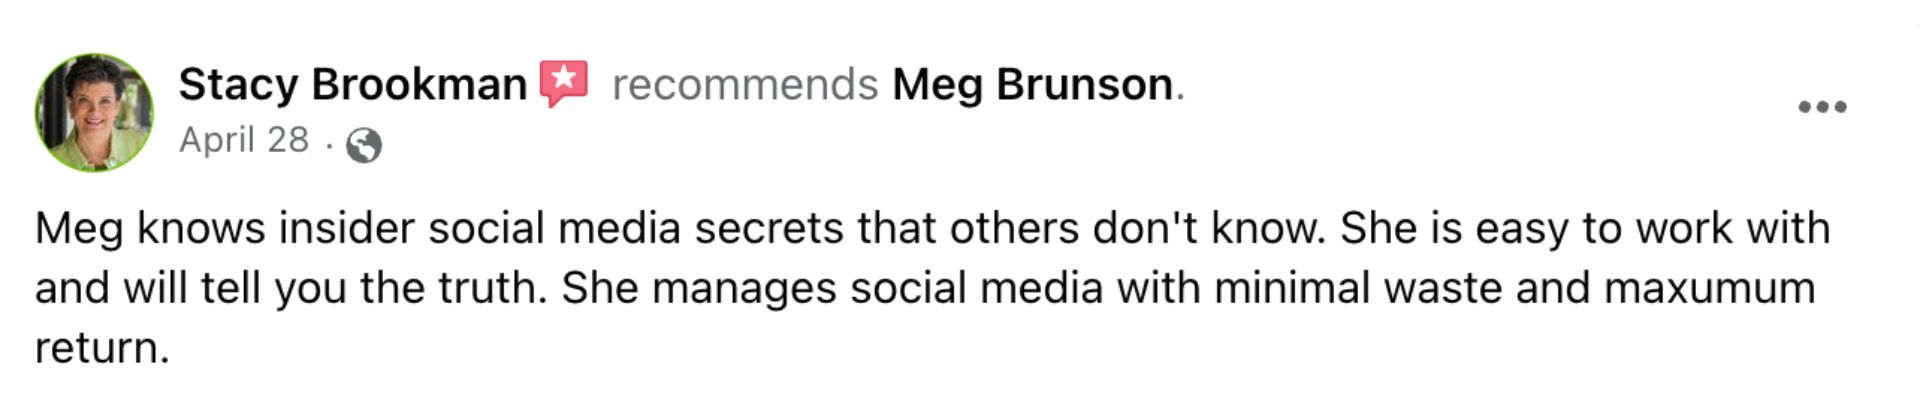 Meg knows insider social media secrets that others don't know. She is easy to work with and will tell you the truth. She manages social media with minimal waste and maximum return. Stacy Brookman. Screenshot from Facebook.